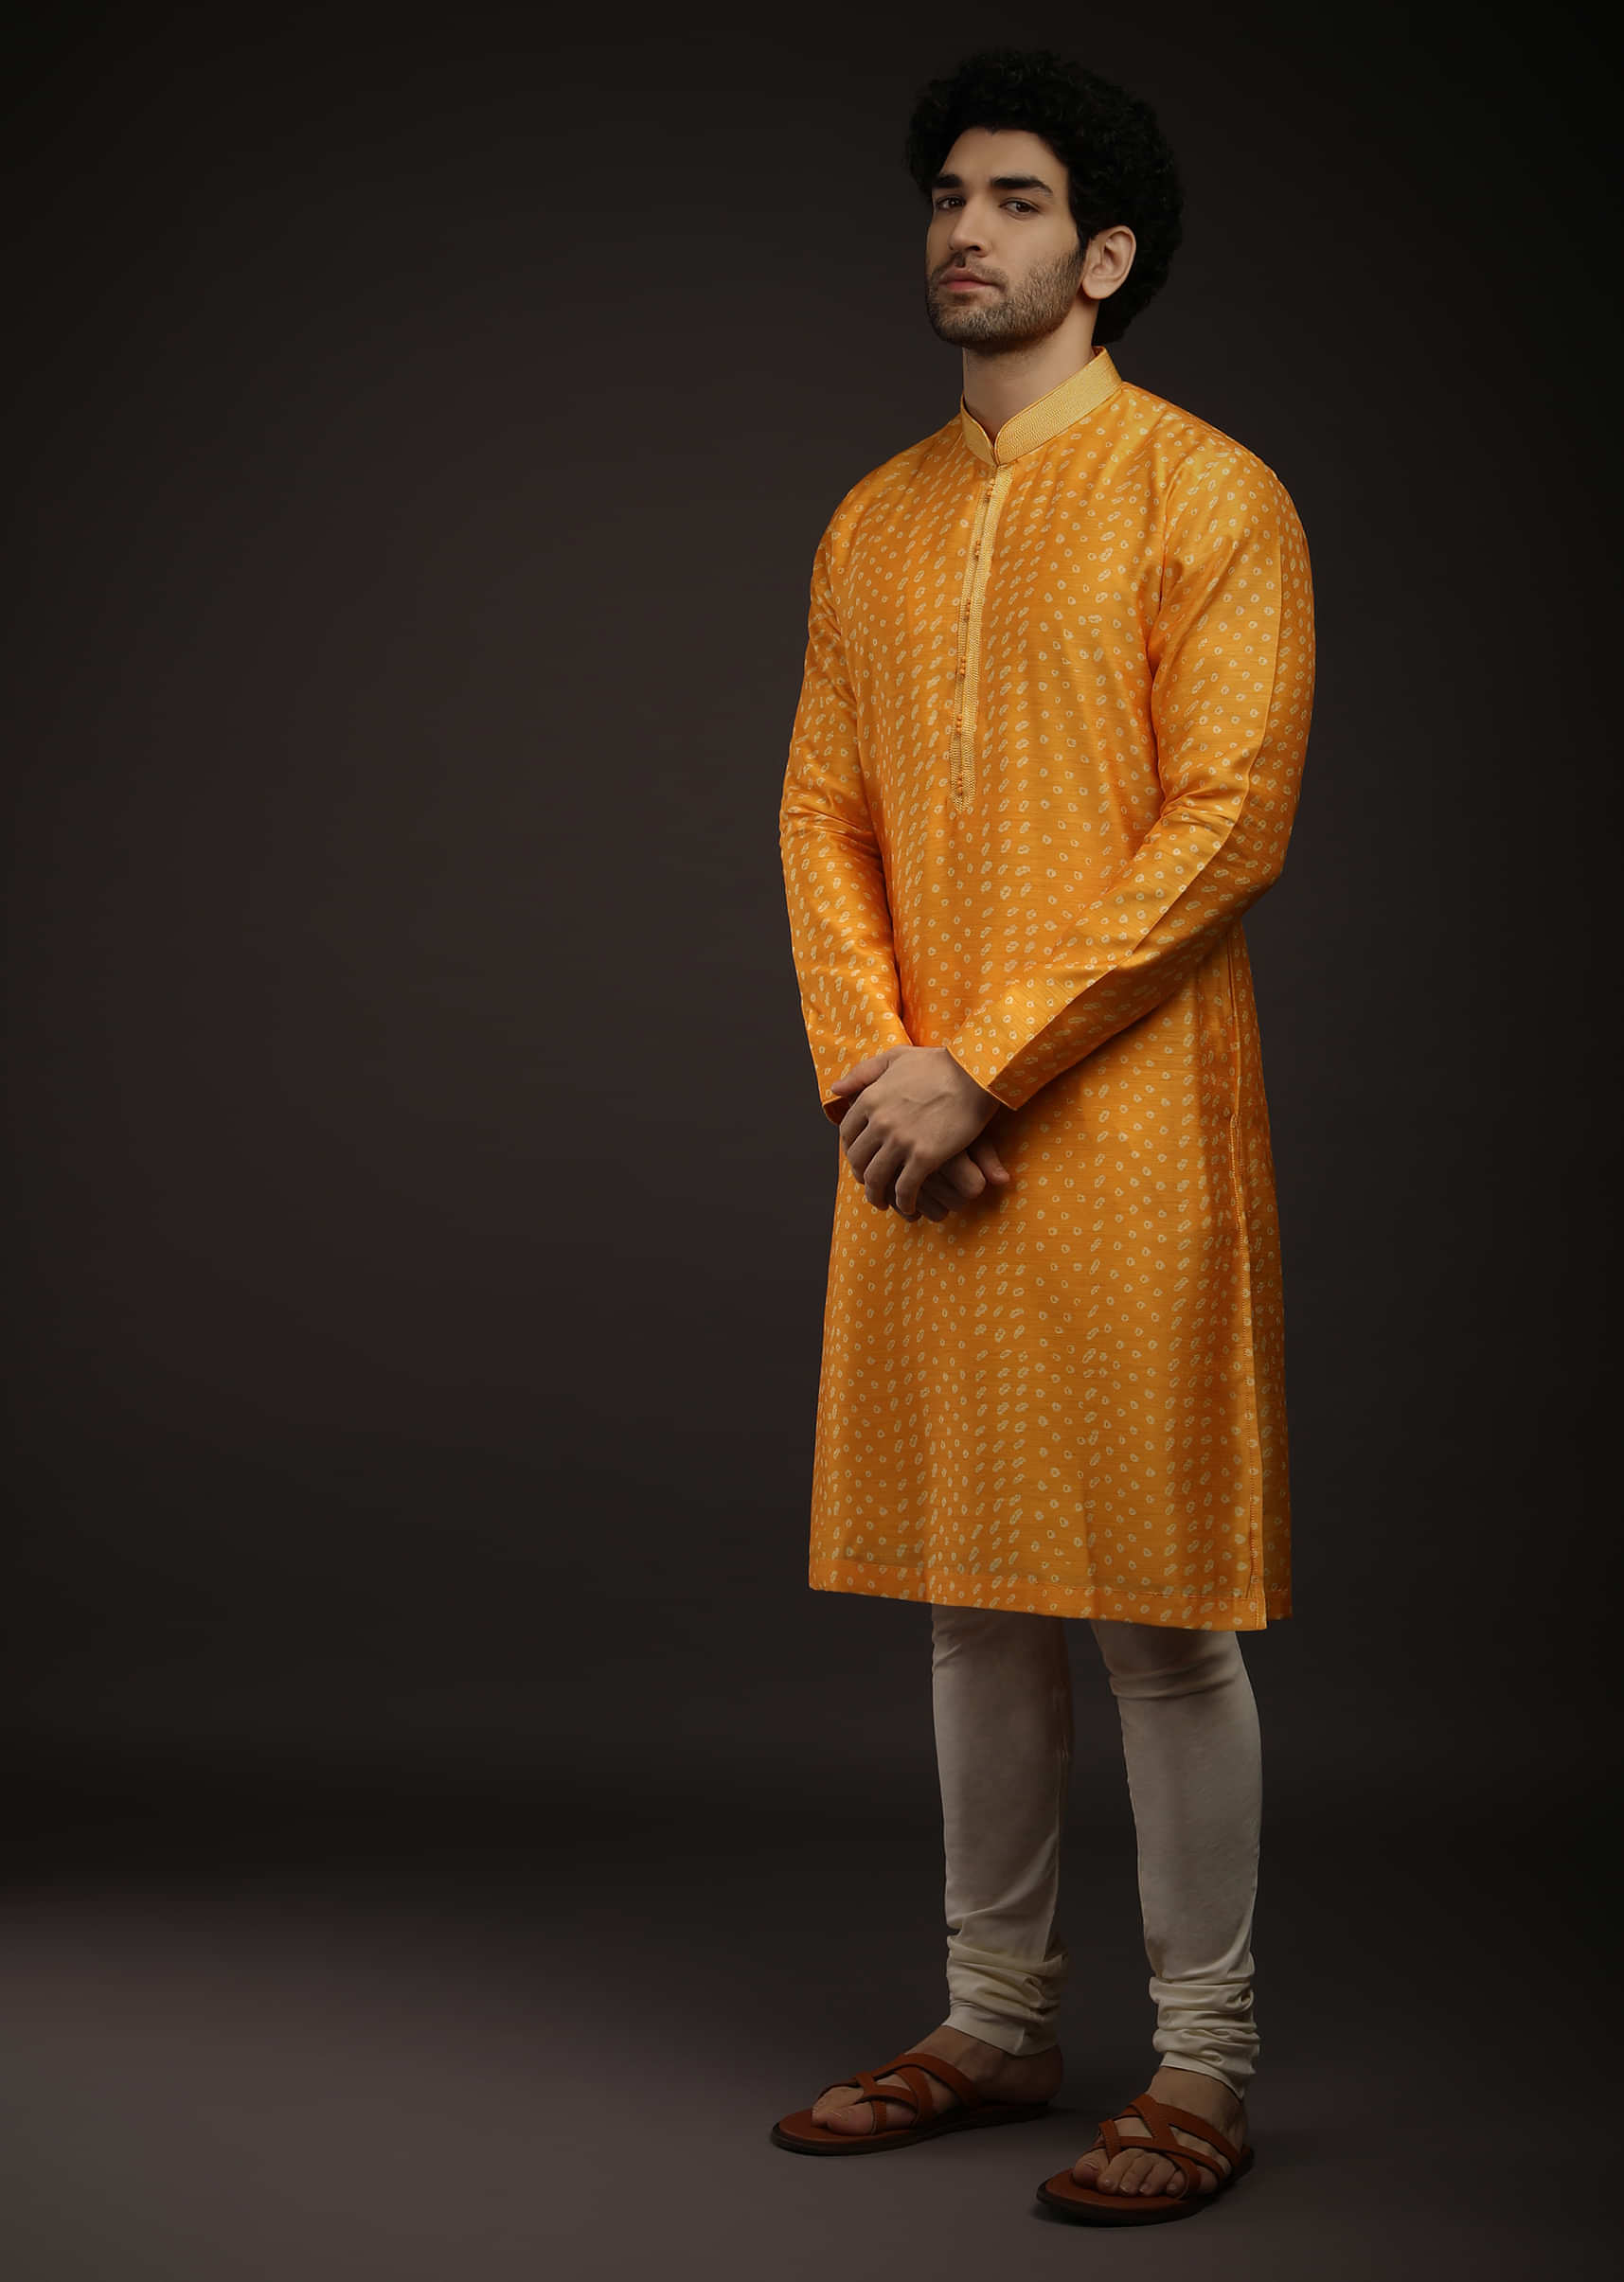 Zinnia Yellow Kurta Set In Raw Silk With Bandhani Design All Over And Resham Work On The Placket